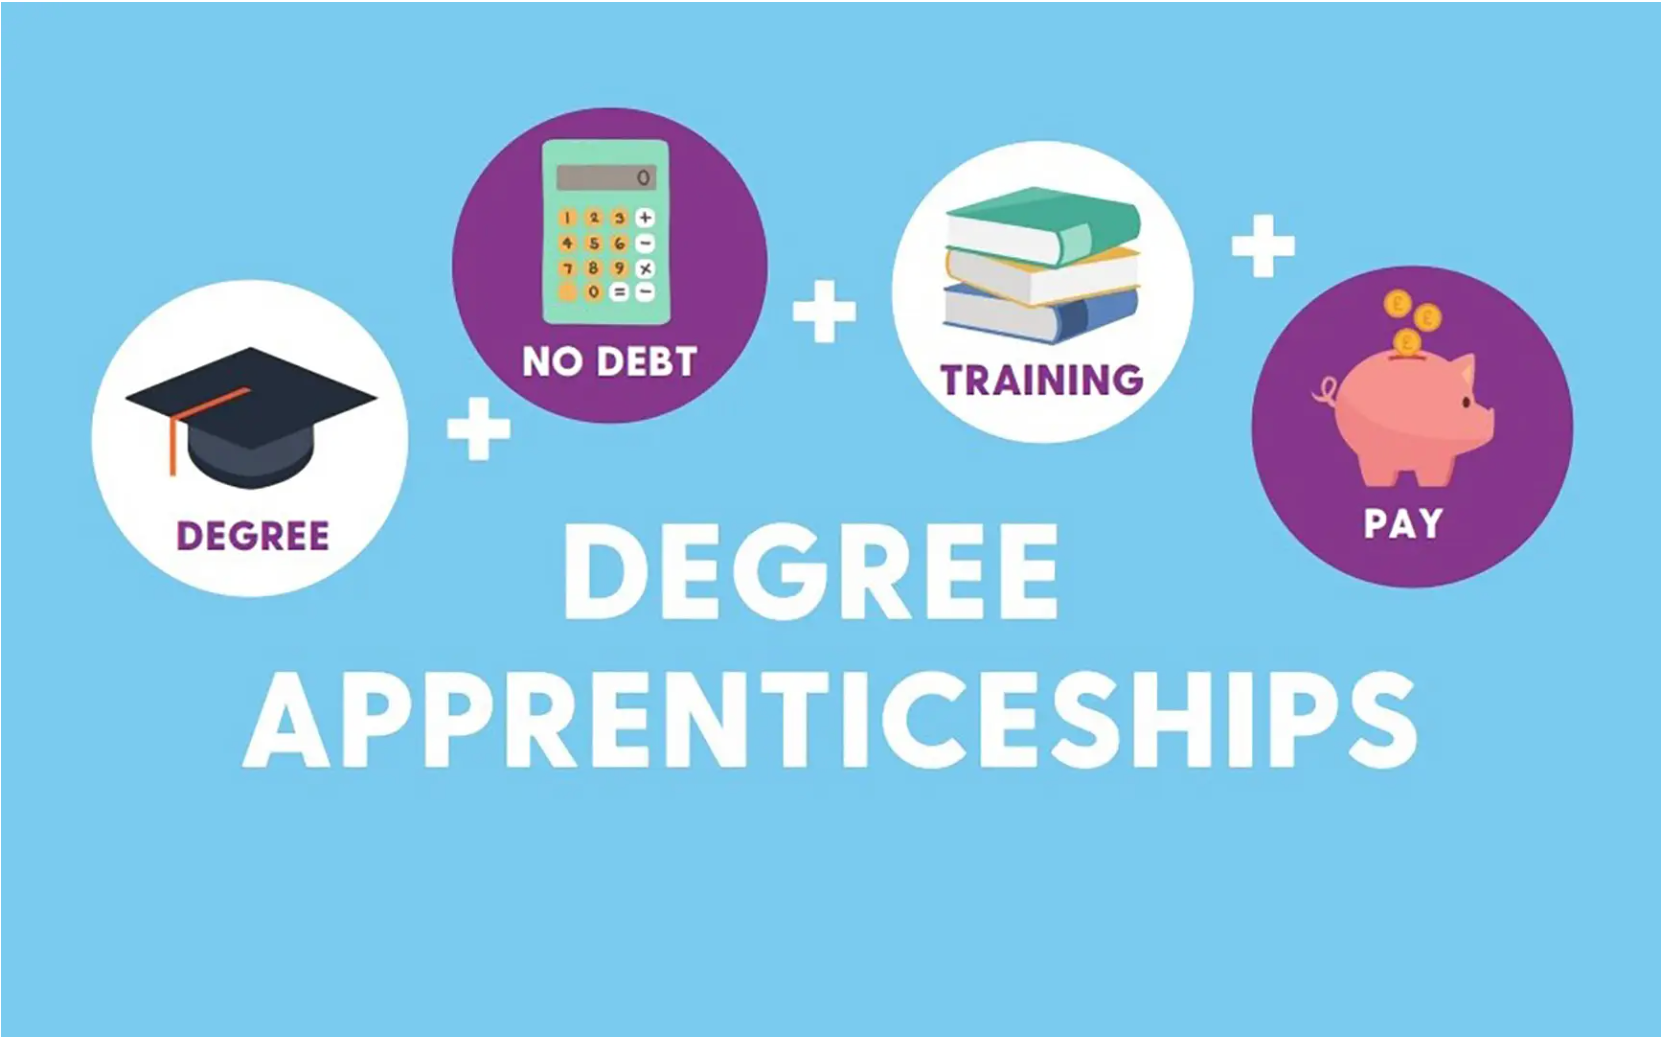 Apprenticeships with degree